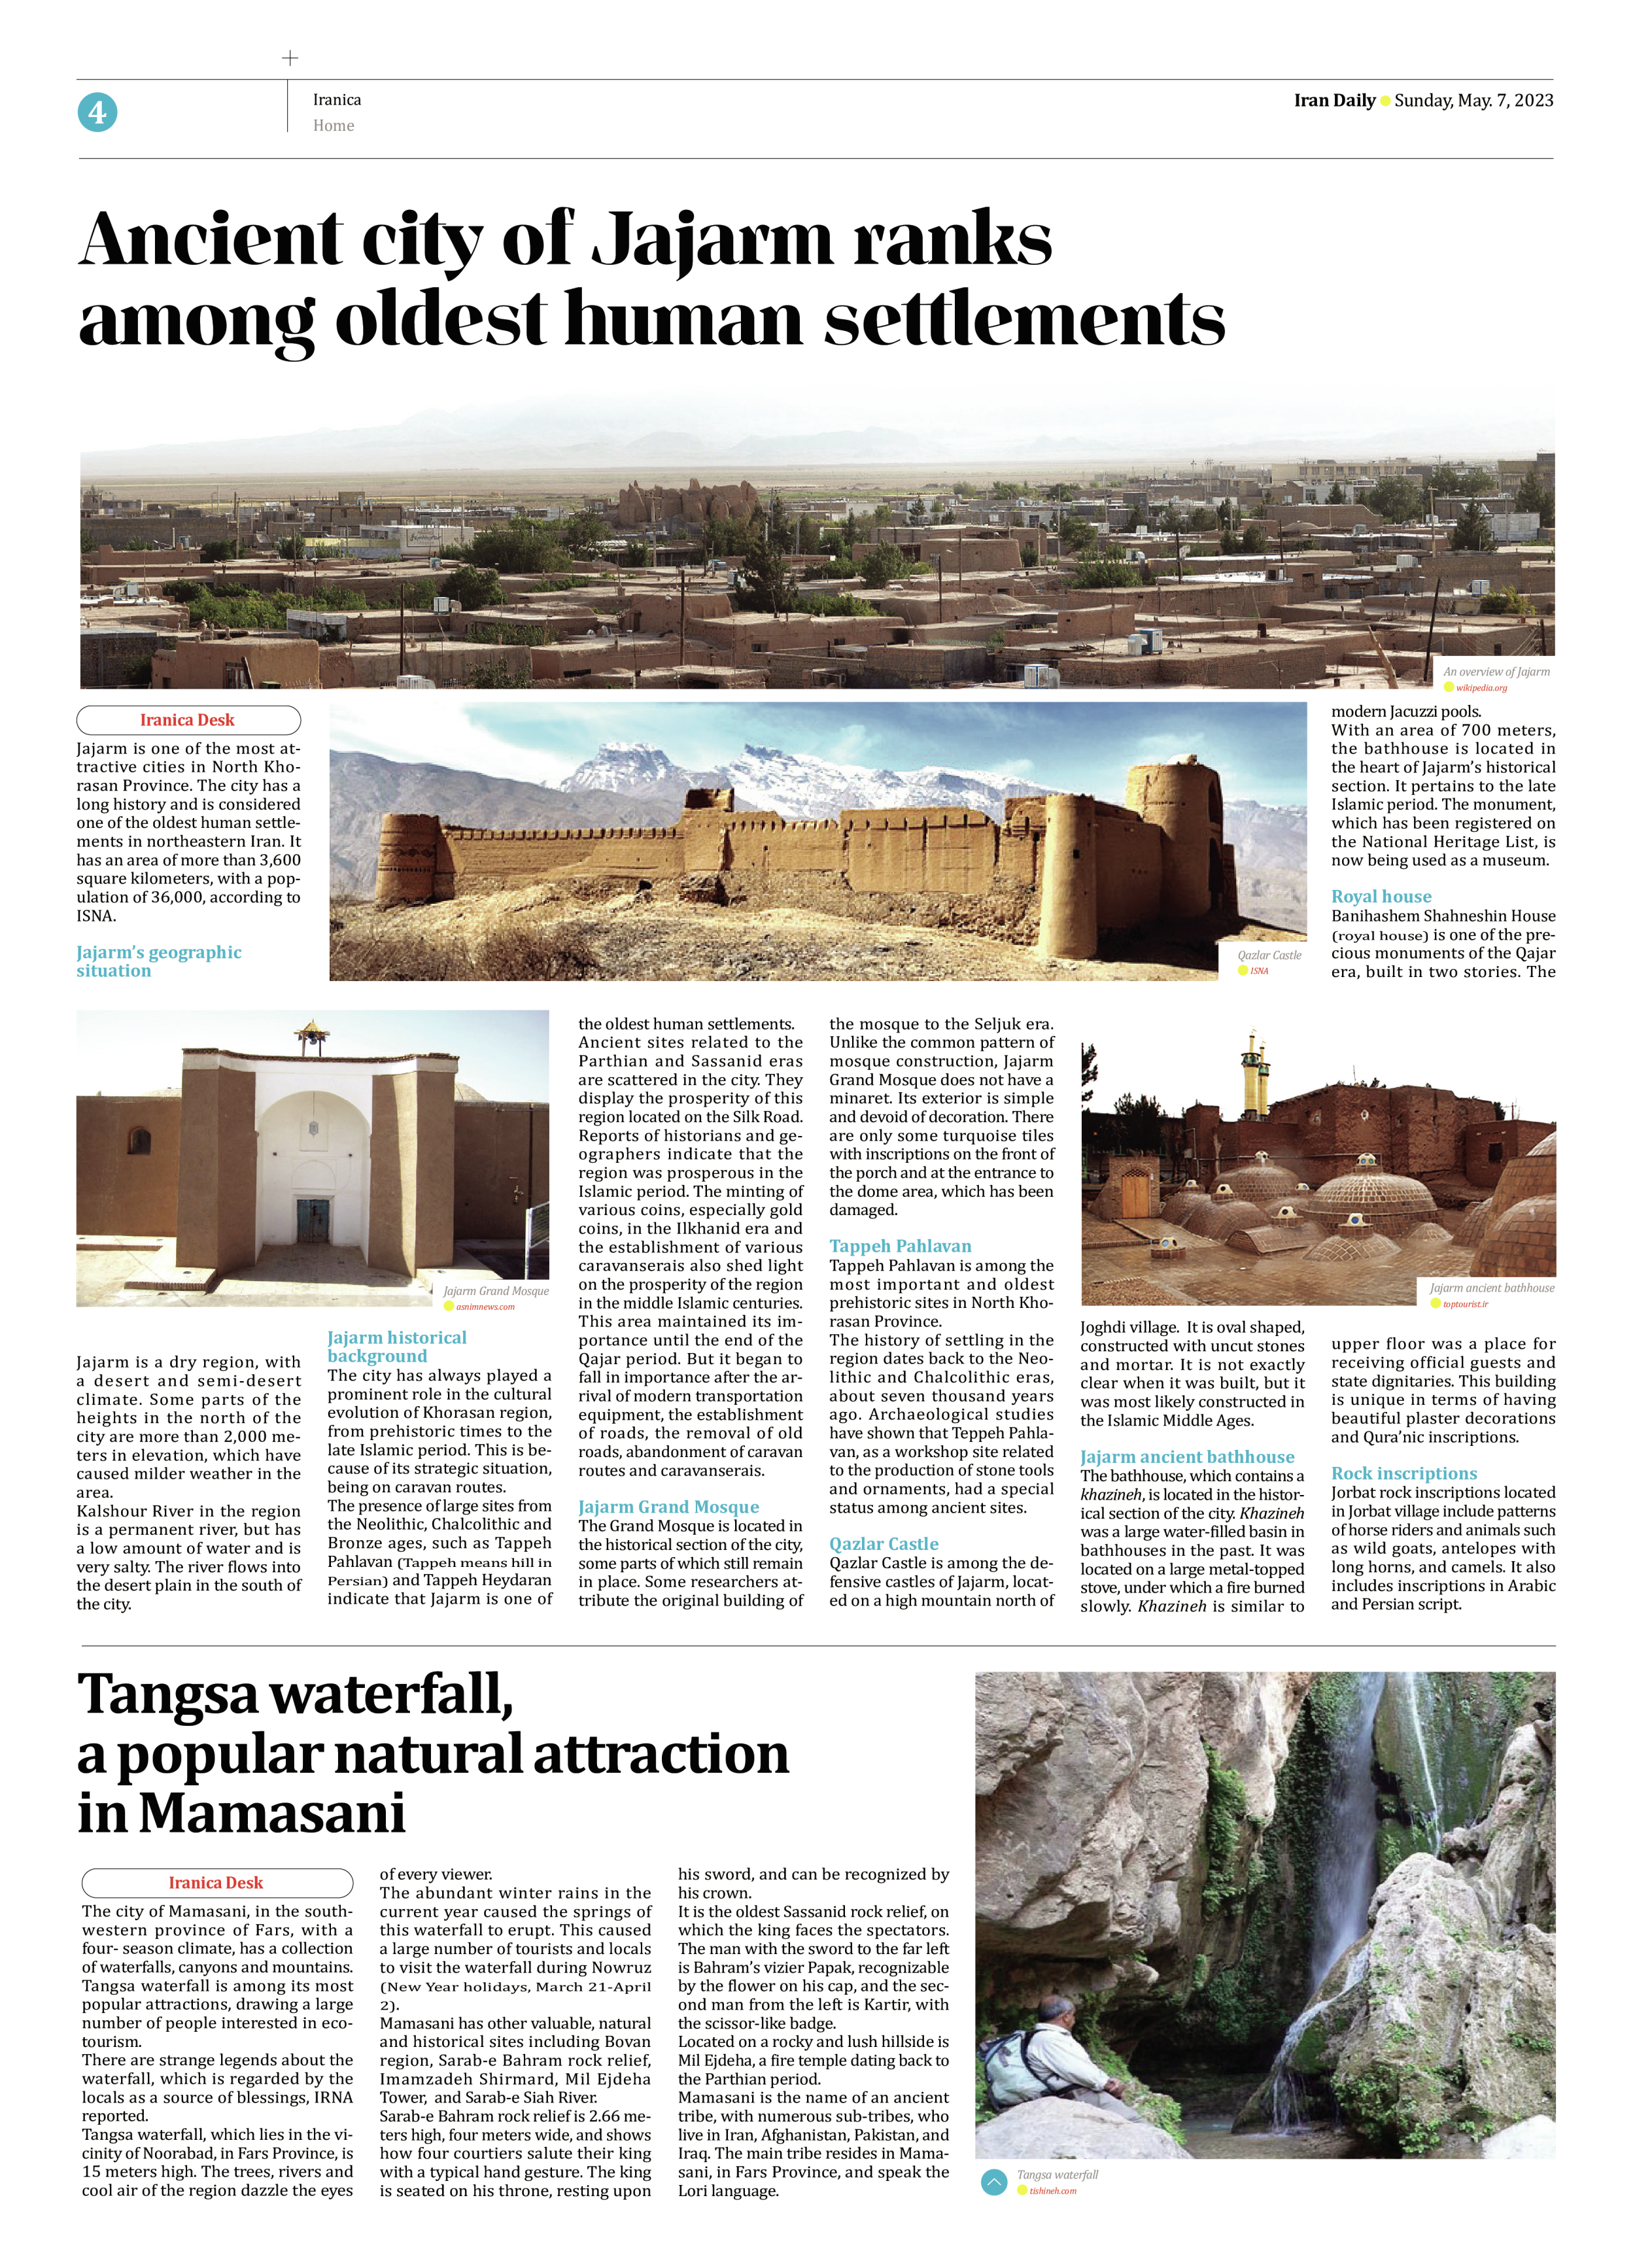 Iran Daily - Number Seven Thousand Two Hundred and Eighty Five - 07 May 2023 - Page 4